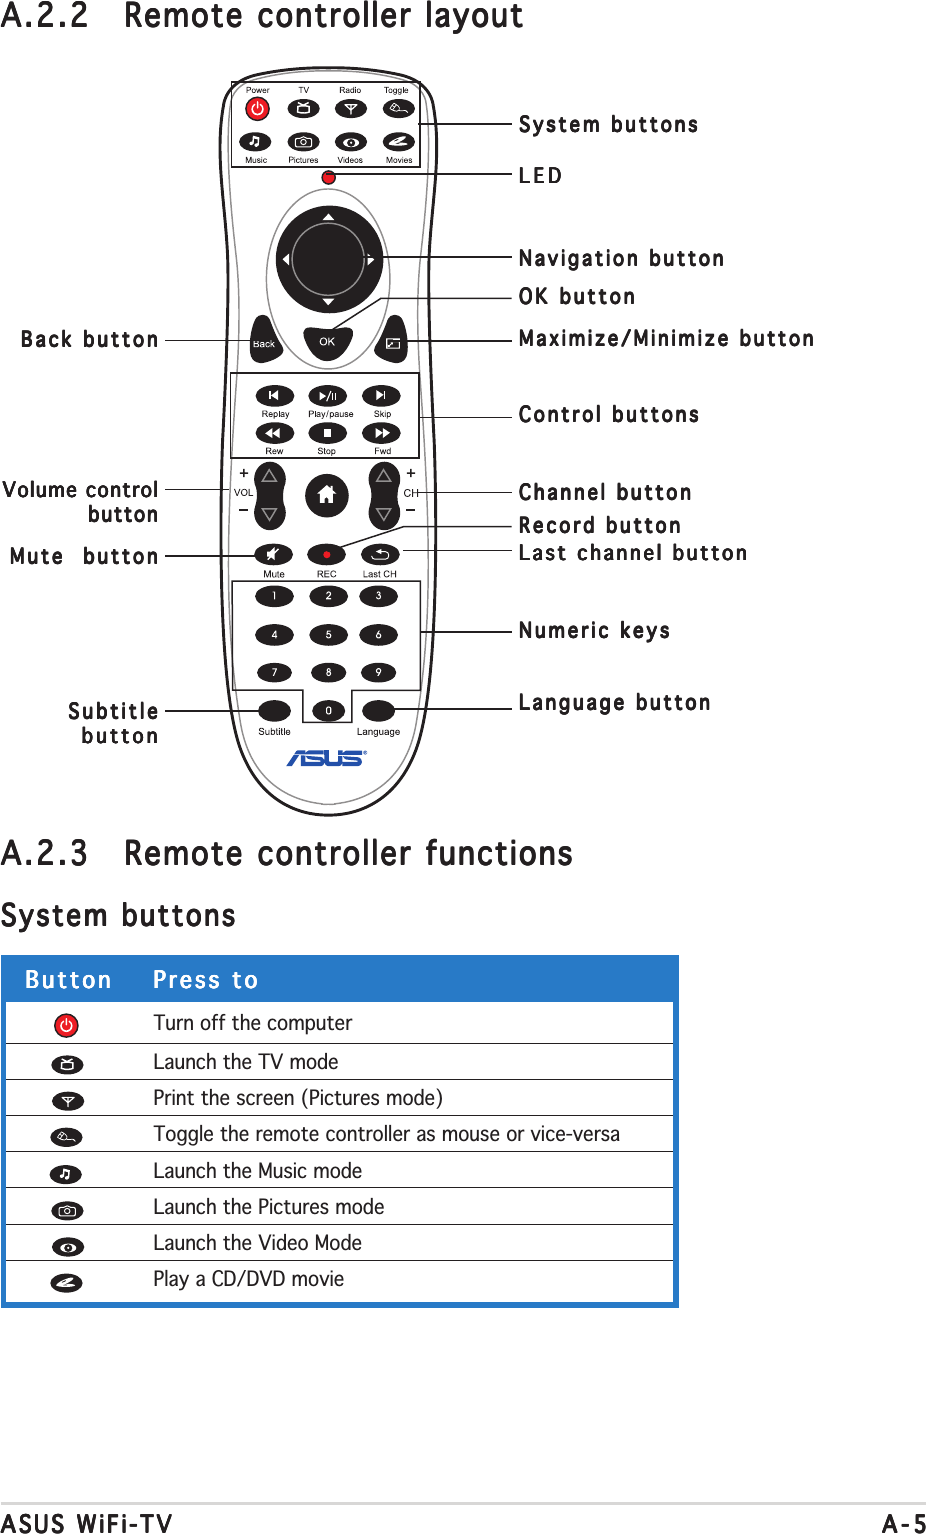 ASUS WiFi-TVASUS WiFi-TVASUS WiFi-TVASUS WiFi-TVASUS WiFi-TV A-5A-5A-5A-5A-5A.2.2A.2.2A.2.2A.2.2A.2.2 Remote controller layoutRemote controller layoutRemote controller layoutRemote controller layoutRemote controller layoutA.2.3A.2.3A.2.3A.2.3A.2.3 Remote controller functionsRemote controller functionsRemote controller functionsRemote controller functionsRemote controller functionsSystem buttonsSystem buttonsSystem buttonsSystem buttonsSystem buttonsLEDLEDLEDLEDLEDSystem buttonsSystem buttonsSystem buttonsSystem buttonsSystem buttonsButtonButtonButtonButtonButton Press toPress toPress toPress toPress toTurn off the computerLaunch the TV modePrint the screen (Pictures mode)Toggle the remote controller as mouse or vice-versaLaunch the Music modeLaunch the Pictures modeLaunch the Video ModePlay a CD/DVD movieNavigation buttonNavigation buttonNavigation buttonNavigation buttonNavigation buttonOK buttonOK buttonOK buttonOK buttonOK buttonMaximize/Minimize buttonMaximize/Minimize buttonMaximize/Minimize buttonMaximize/Minimize buttonMaximize/Minimize buttonControl buttonsControl buttonsControl buttonsControl buttonsControl buttonsChannel buttonChannel buttonChannel buttonChannel buttonChannel buttonLast channel buttonLast channel buttonLast channel buttonLast channel buttonLast channel buttonNumeric keysNumeric keysNumeric keysNumeric keysNumeric keysLanguage buttonLanguage buttonLanguage buttonLanguage buttonLanguage buttonBack buttonBack buttonBack buttonBack buttonBack buttonVolume controlVolume controlVolume controlVolume controlVolume controlbuttonbuttonbuttonbuttonbuttonMute  buttonMute  buttonMute  buttonMute  buttonMute  buttonSubtitleSubtitleSubtitleSubtitleSubtitlebuttonbuttonbuttonbuttonbuttonRecord buttonRecord buttonRecord buttonRecord buttonRecord button